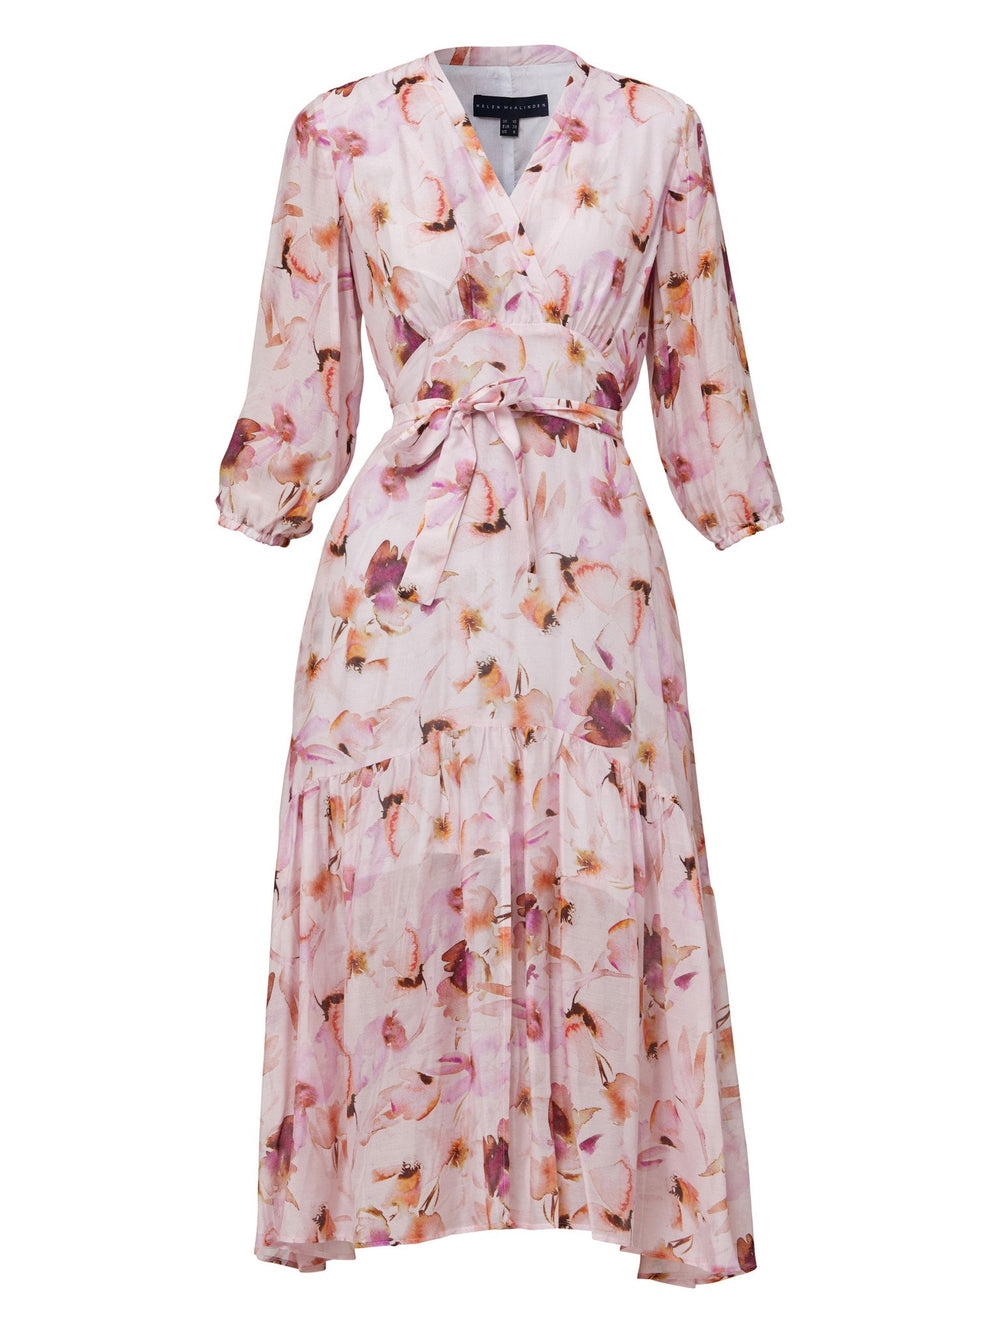 Beverly, the ultimate summer day dress. This statement piece features a cross over V-neck detail, a flattering back waist tie, voluminous sleeves and front slit. Crafted in our super soft silk in a delicate watercolour floral print. Perfect for summer weddings, garden parties or wherever you'd like to make an entrance.